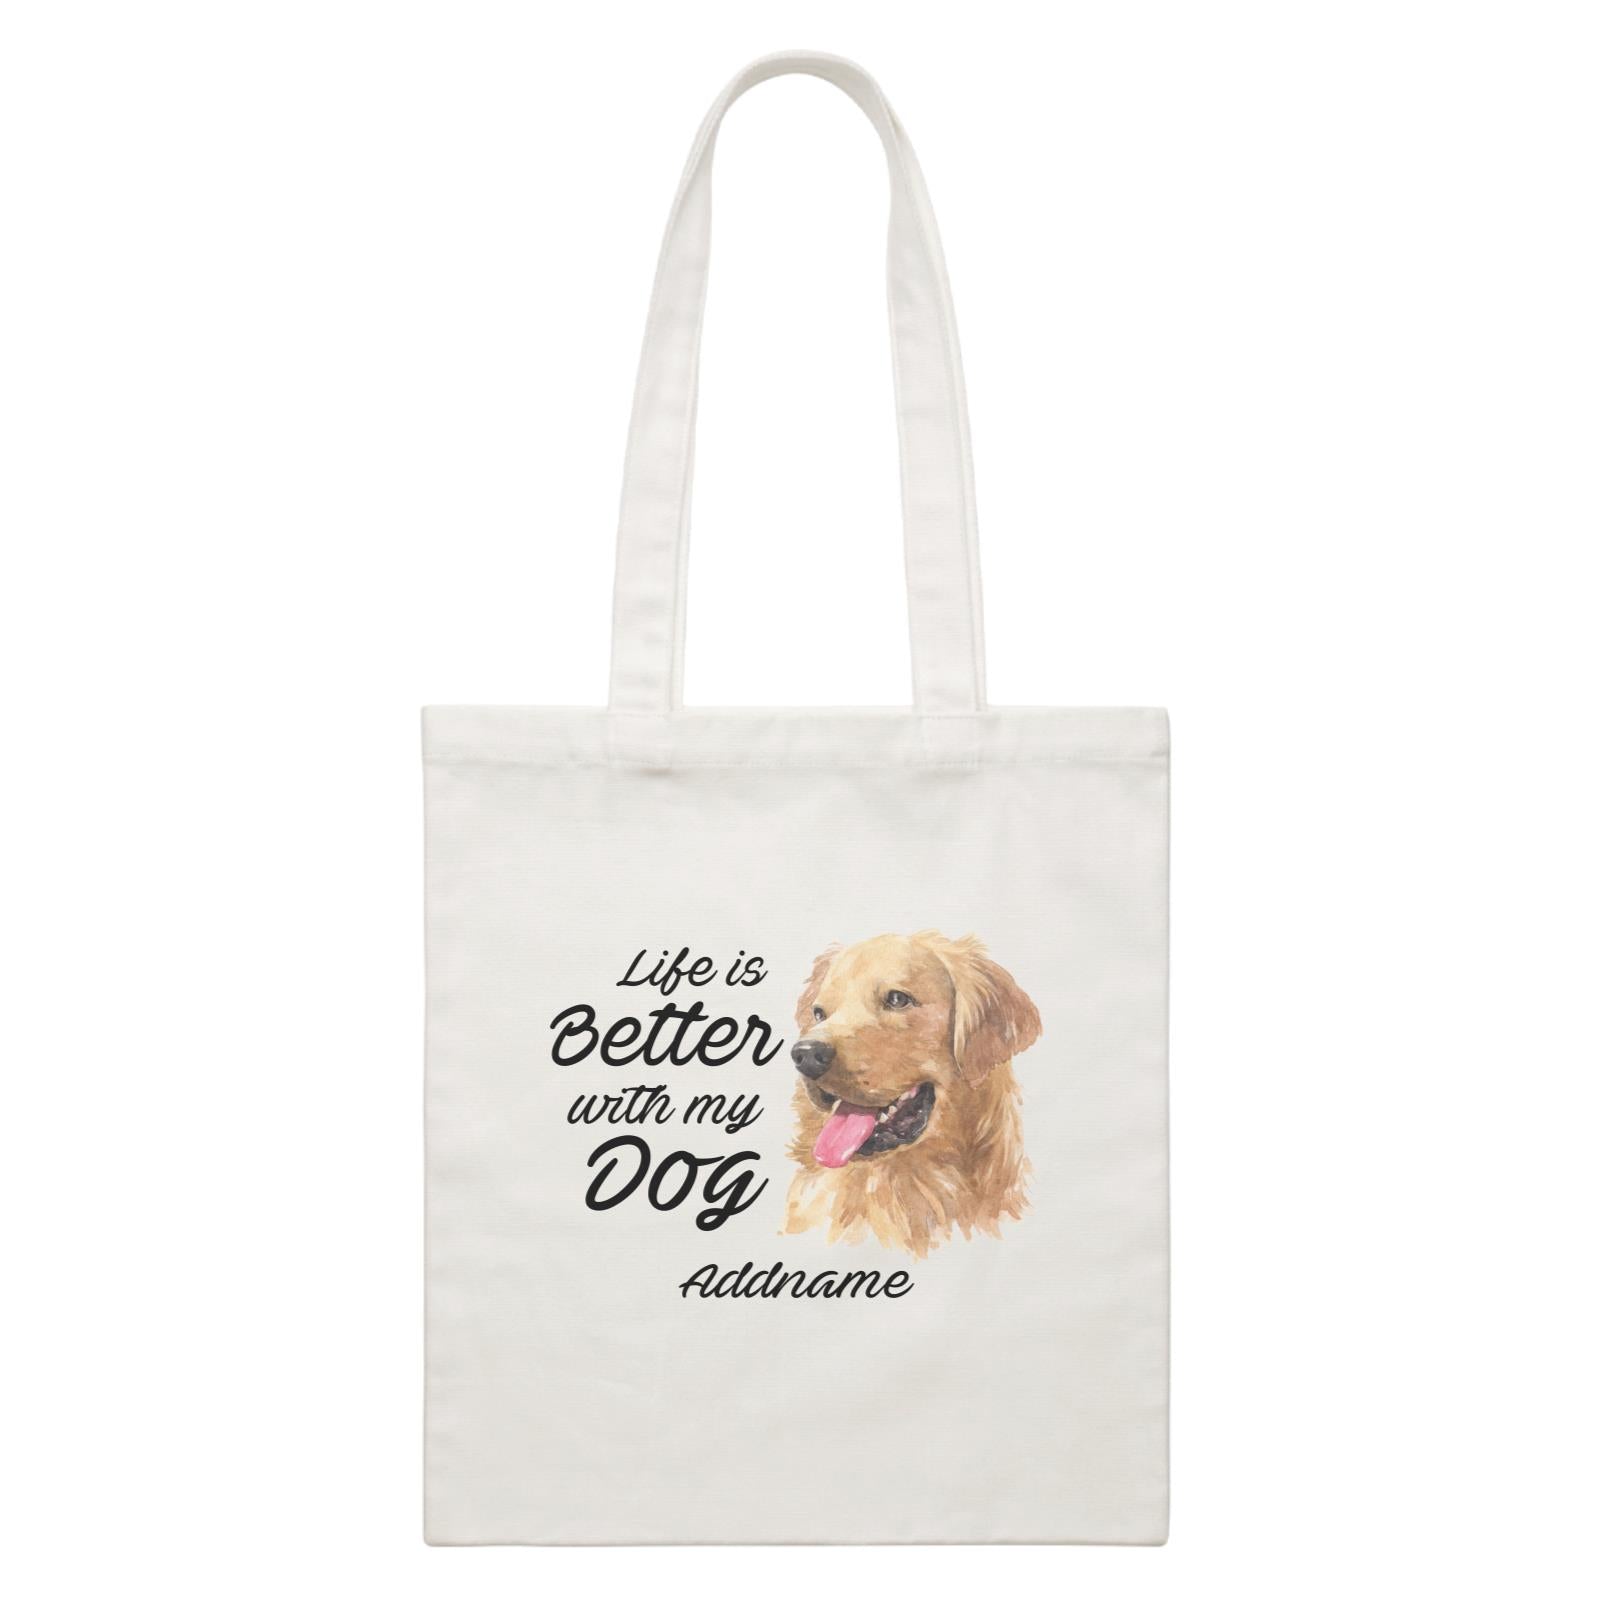 Watercolor Life is Better With My Dog Golden Retriever Left Addname White Canvas Bag